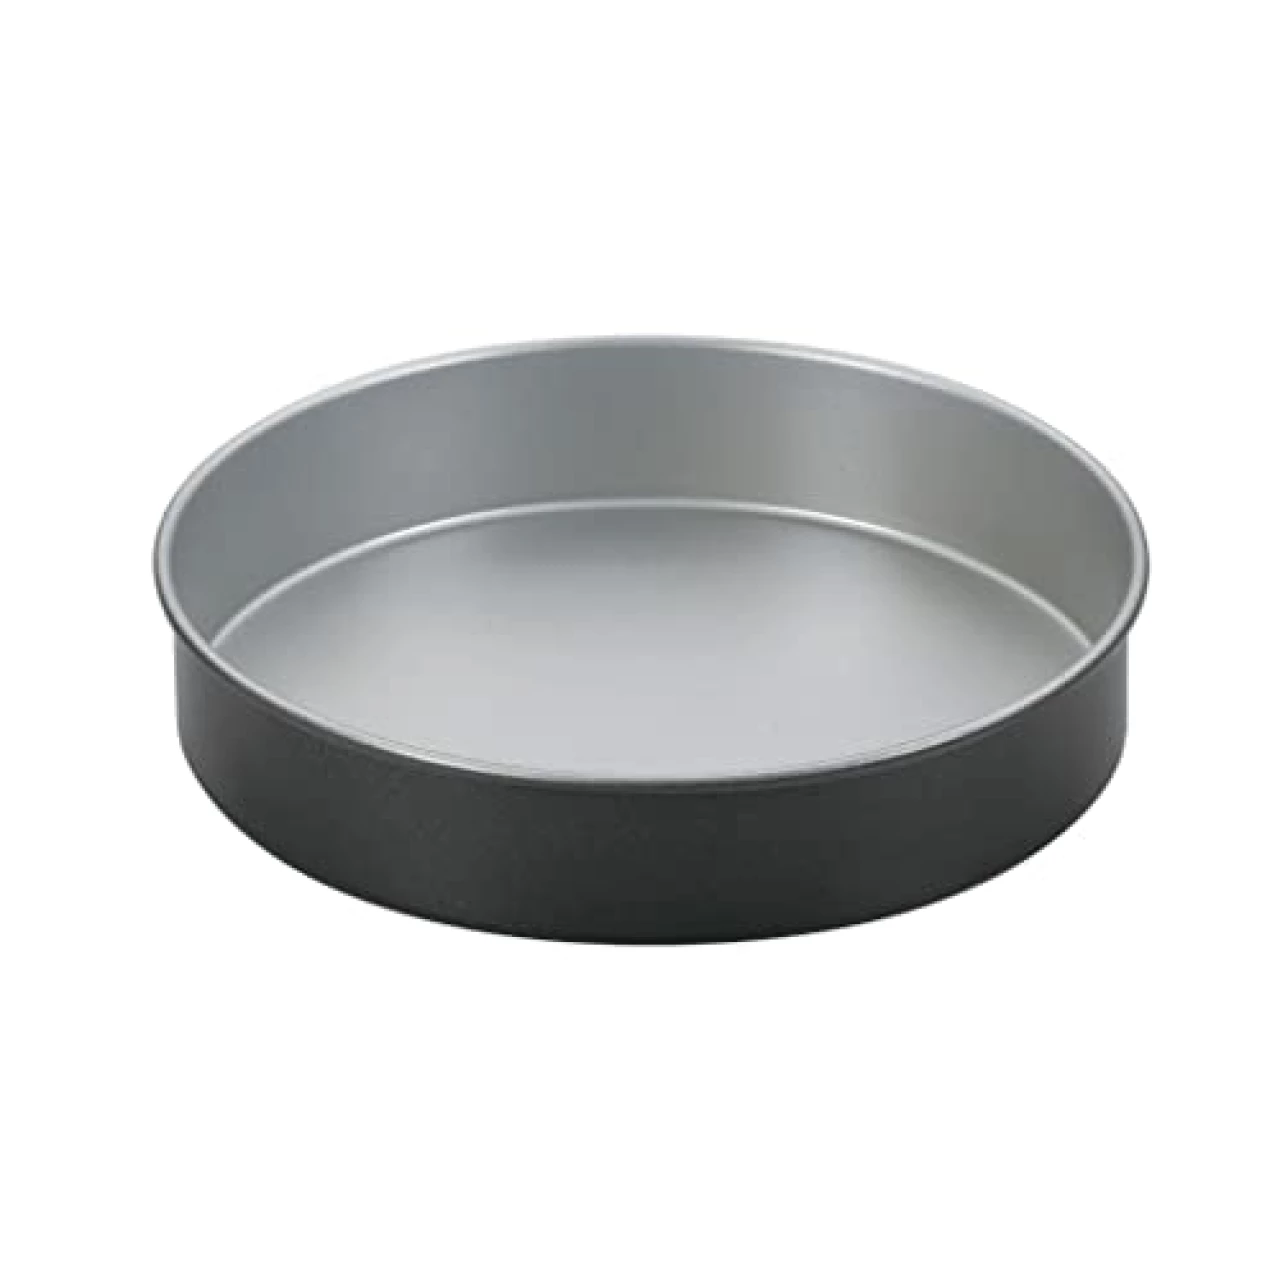 Cuisinart 9-Inch Round Cake Pan, Chef&rsquo;s Classic Nonstick Bakeware, Silver, AMB-9RCK